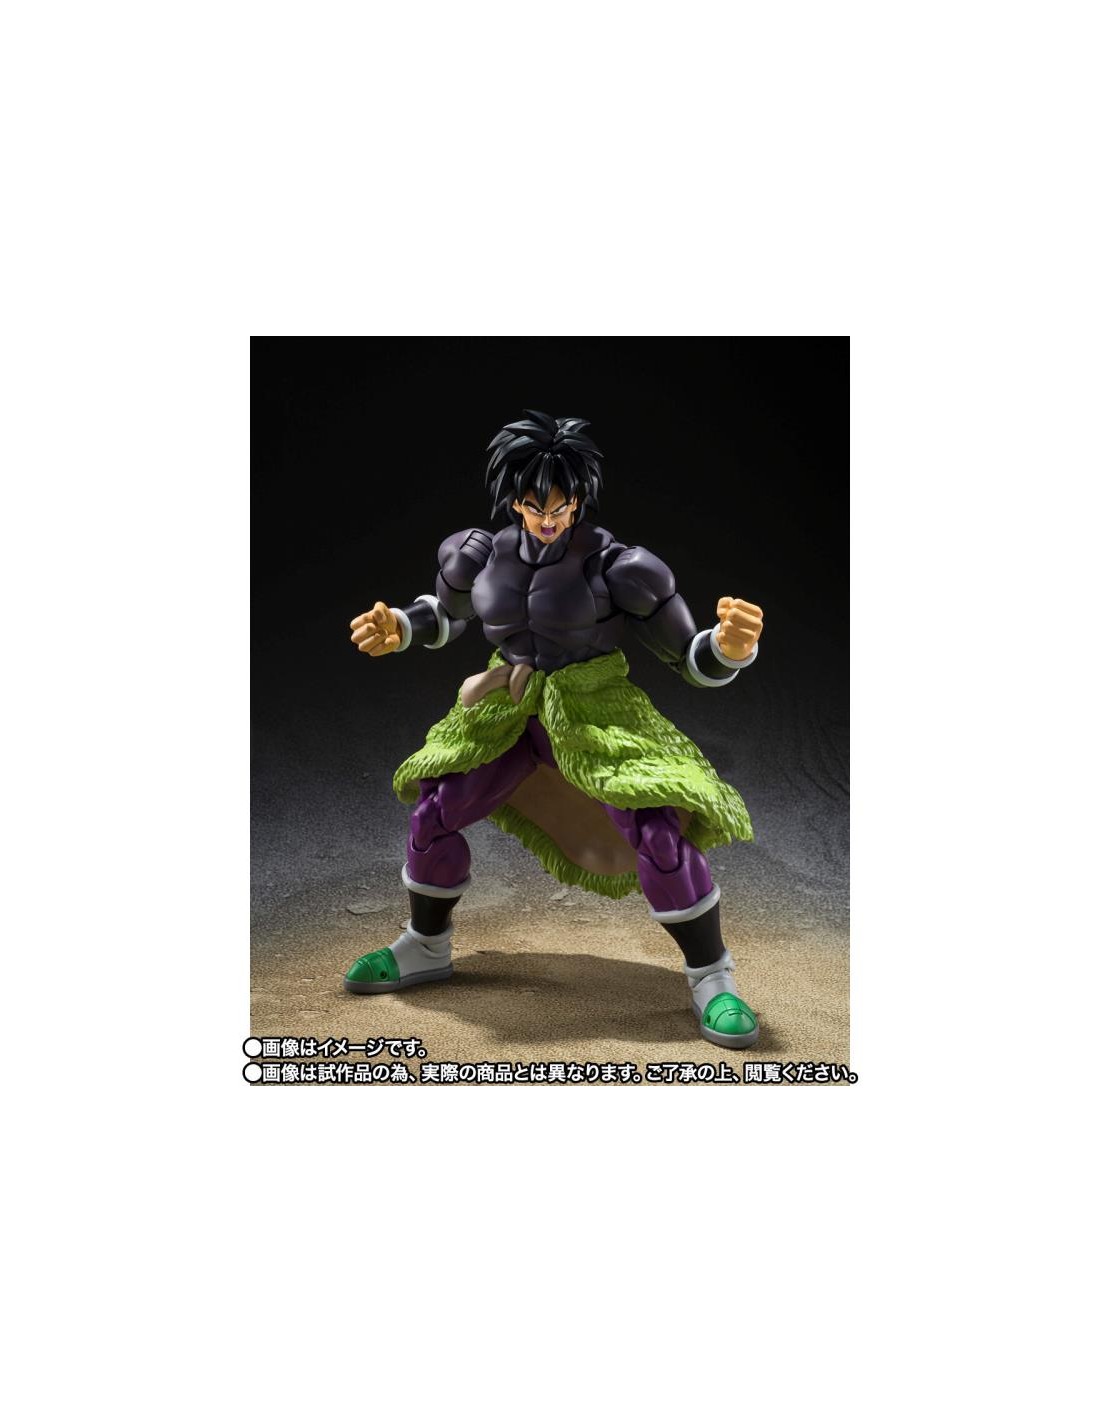 Bandai Broly NEW - Action Figures & Accessories